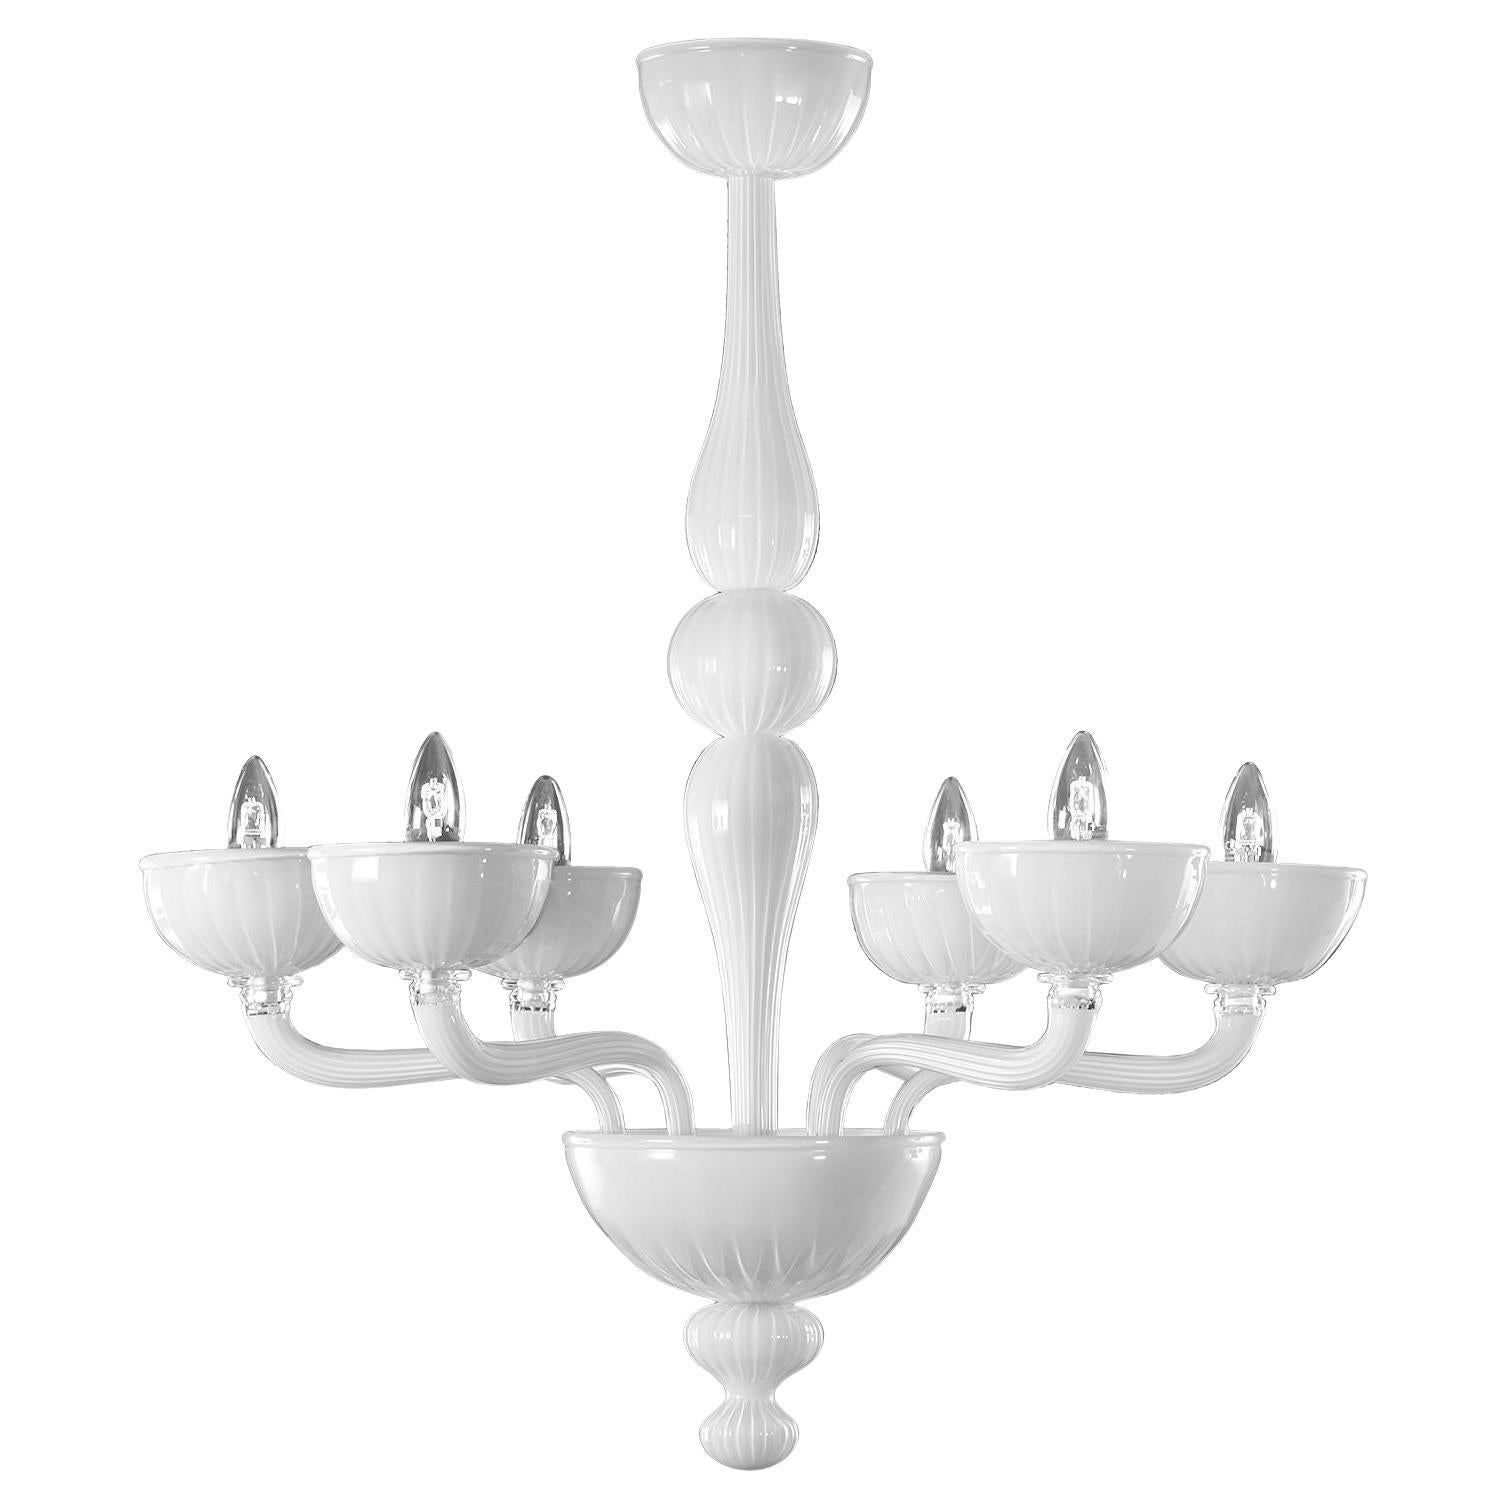 Rigadin Chandelier 6 Arms White Encased Murano Glass Edgar by Multiforme